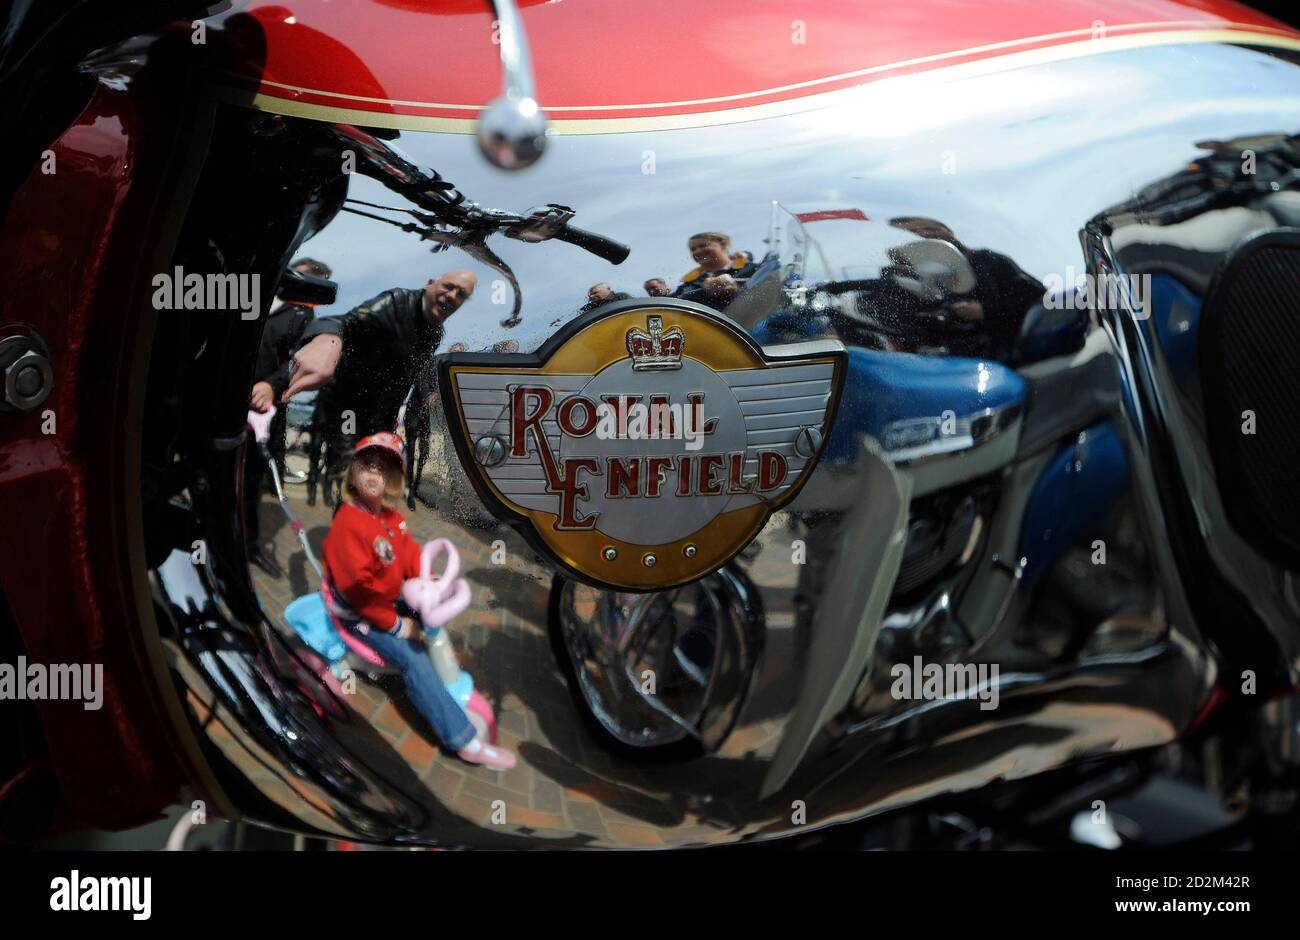 People are reflected in a motorcycle fuel tank during 'Mad Sunday' at the TT meeting, on the Isle of Man June 7, 2009.       REUTERS/Nigel Roddis      (BRITAIN SPORT MOTOR RACING SOCIETY) Stock Photo